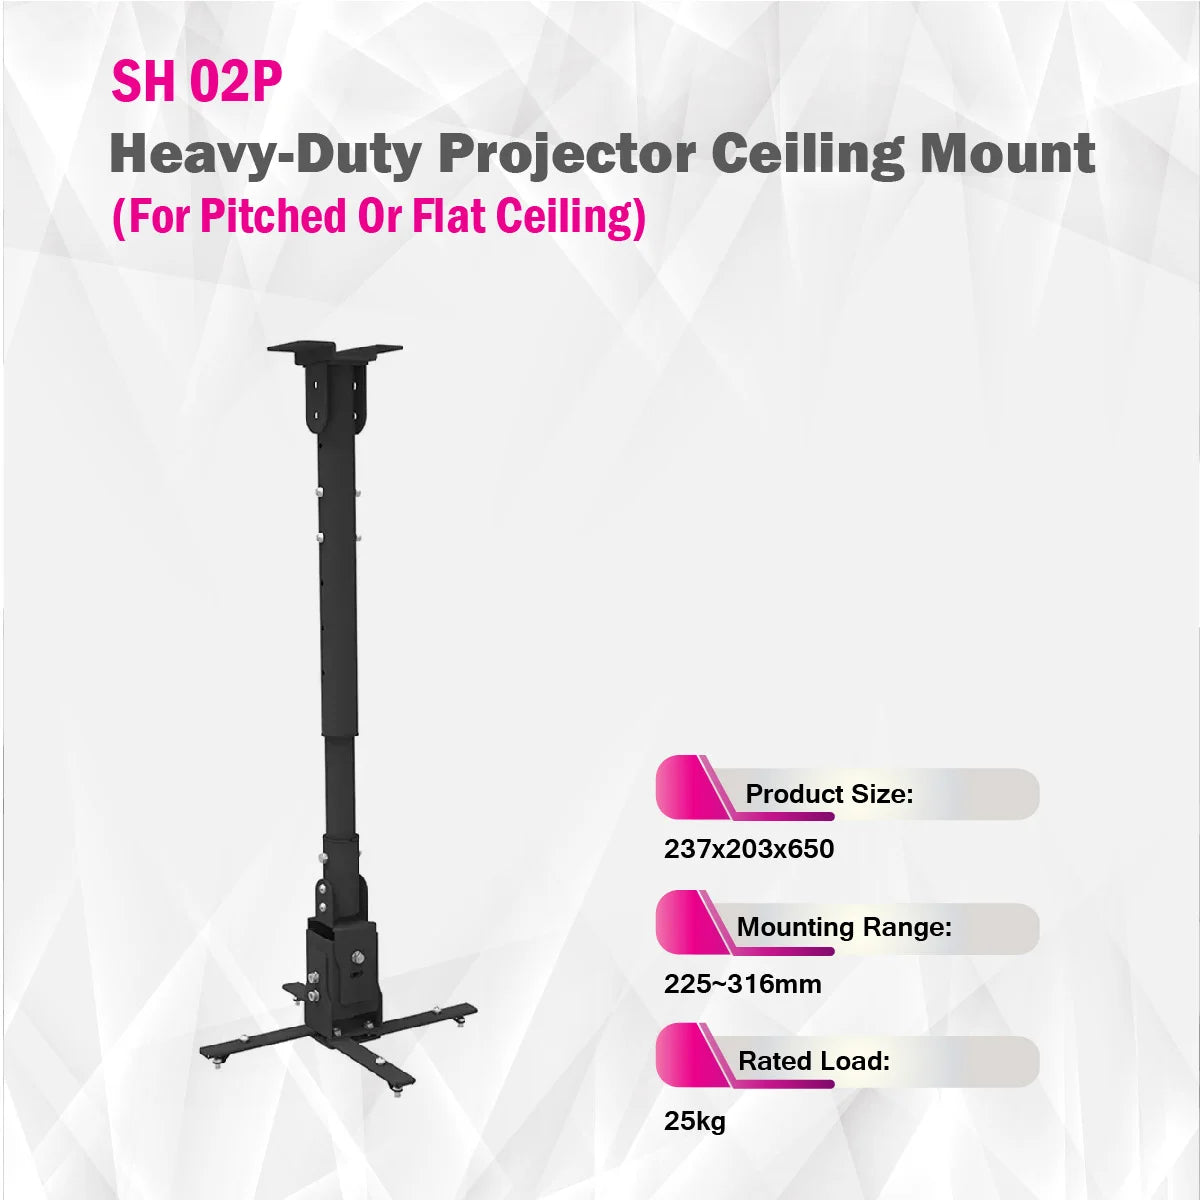 Skill Tech SH 02P - Heavy-Duty Projector Ceiling Mount (For Pitched Or Flat Ceiling)